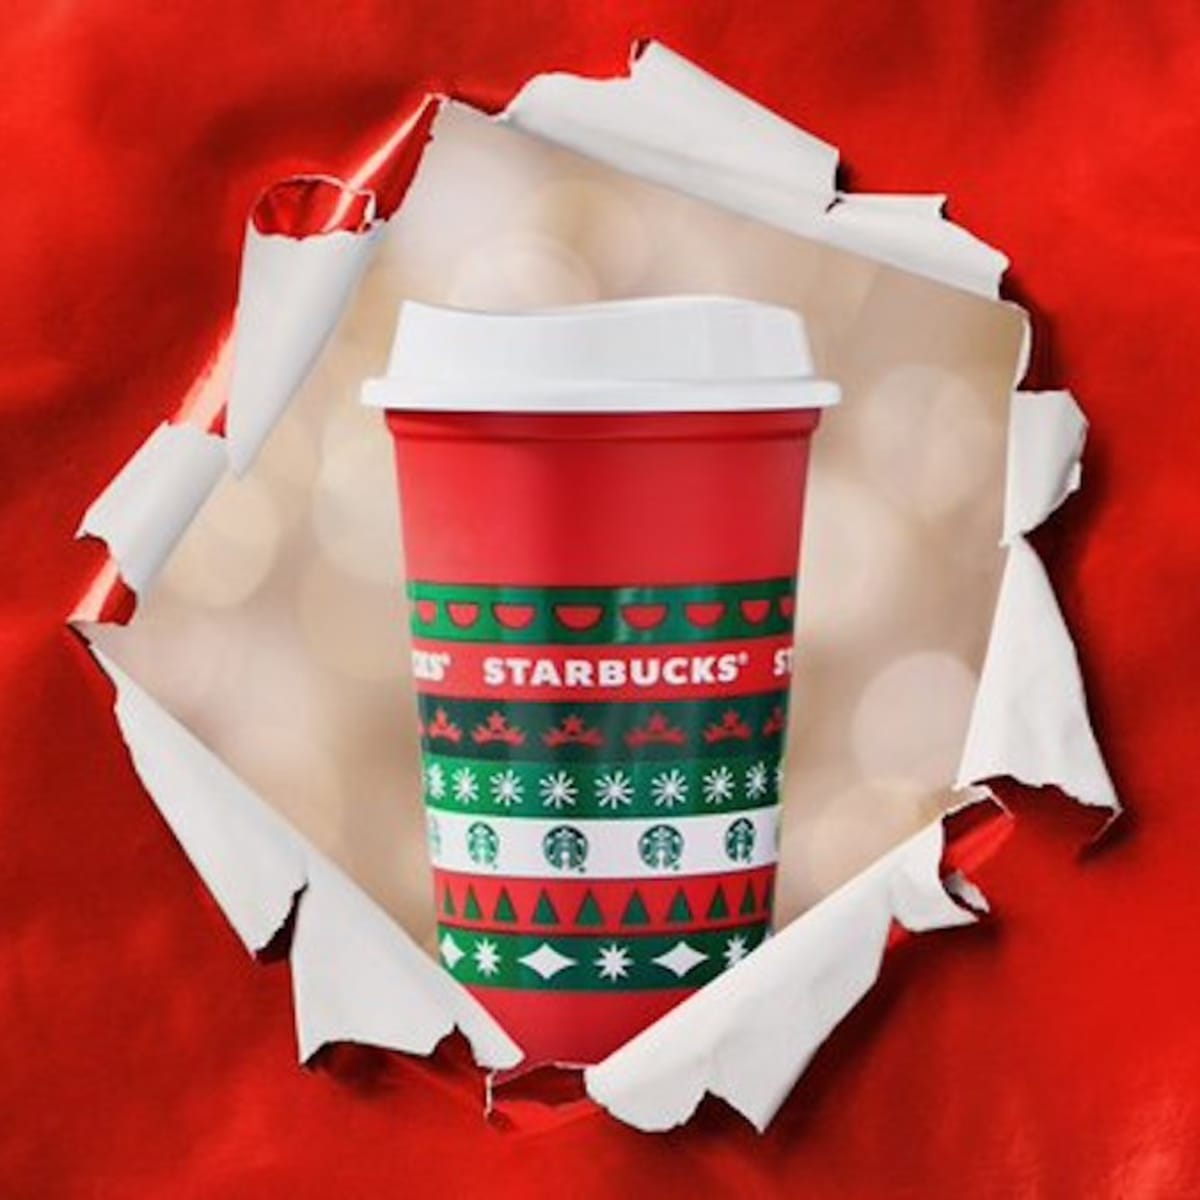 Starbucks Holiday Drinks Menu For 2021 & Red Christmas Cup Launch